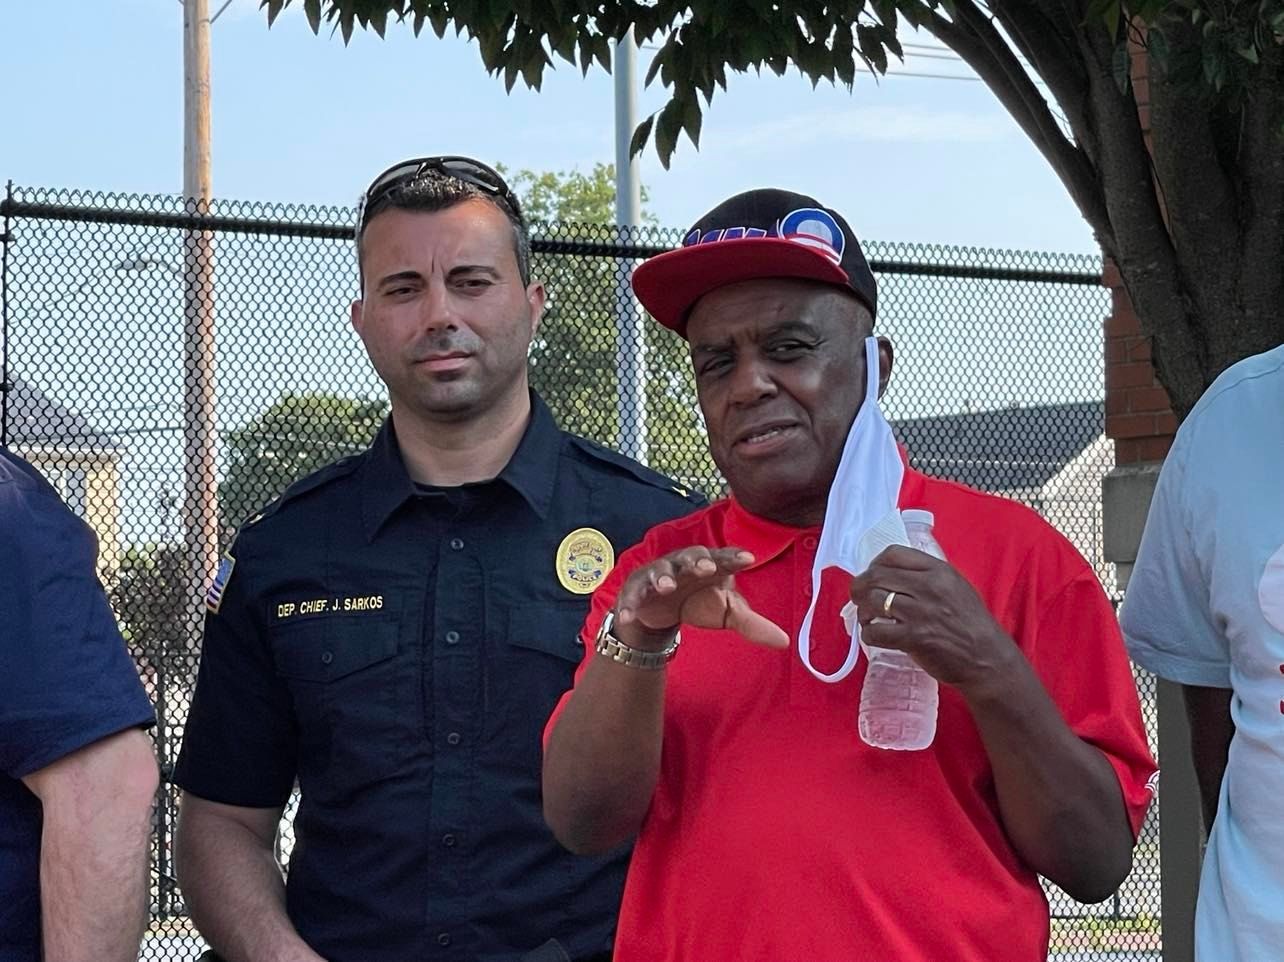 Acting Atlantic City Police Chief James A. Sarkos (Left) stands beside Perry Mays (Right) at annual community walk.